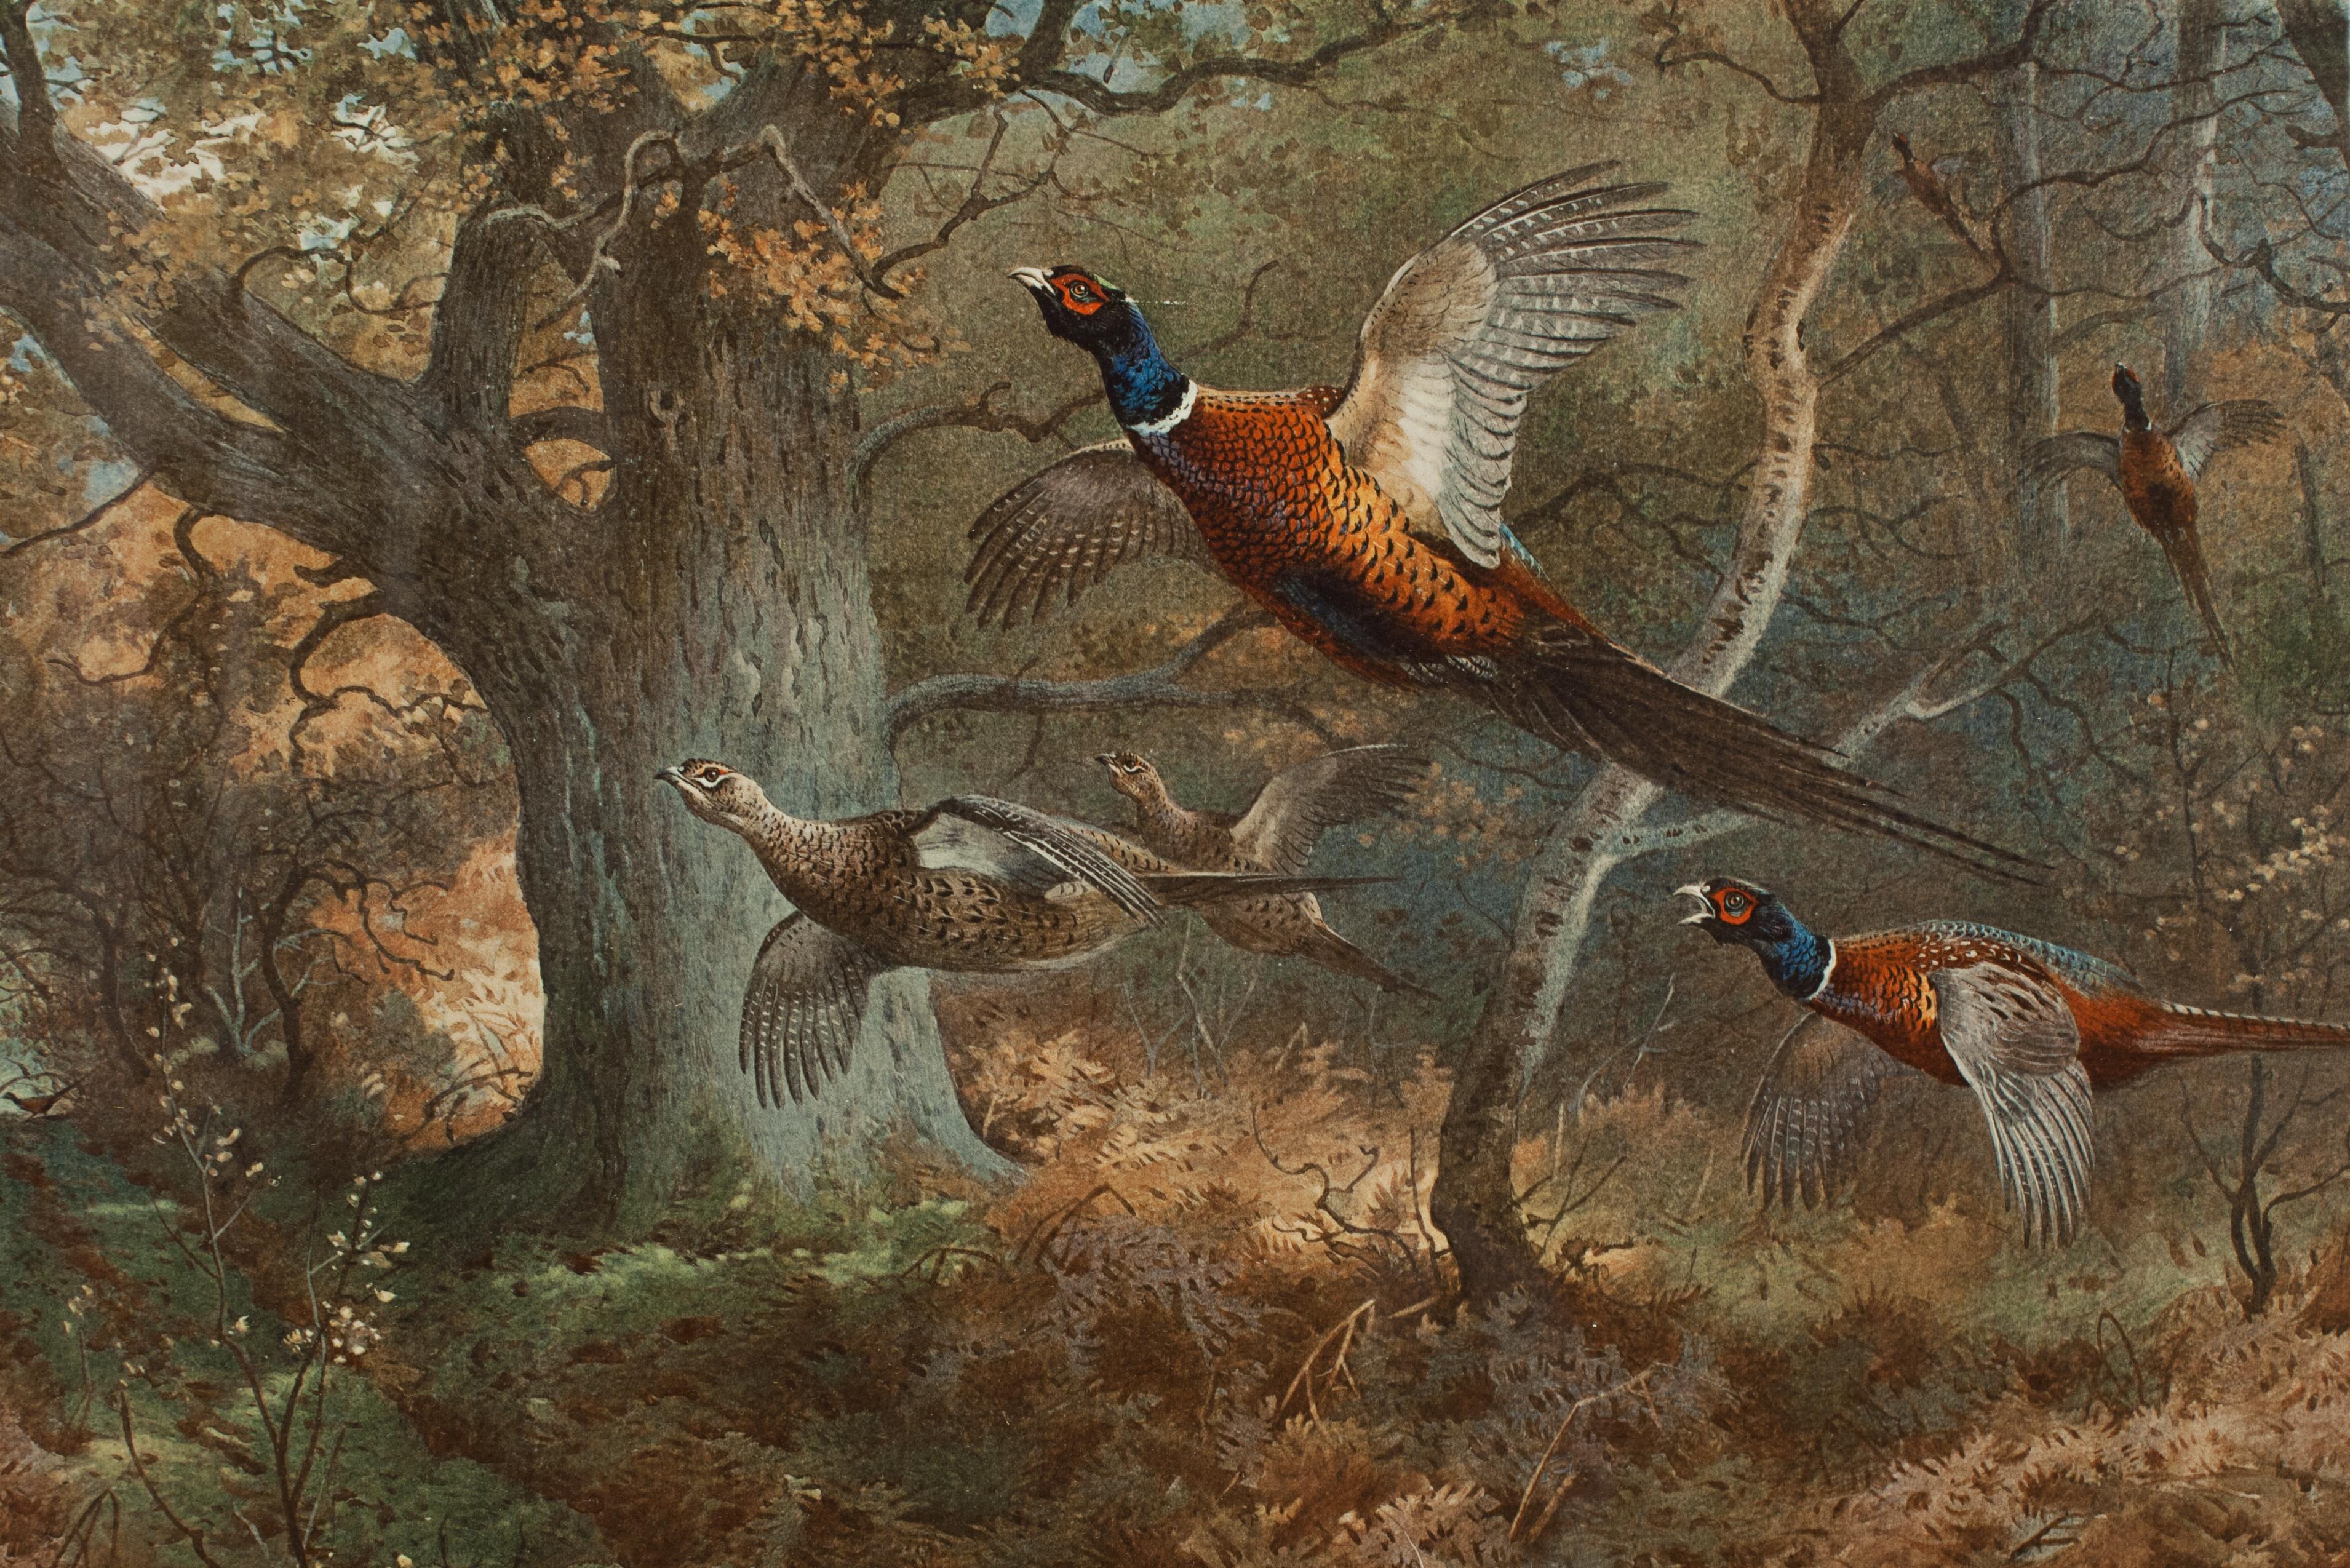 Vintage Game Bird Prints, Colotypes by Archibald Thorburn 'The Seasons' 4